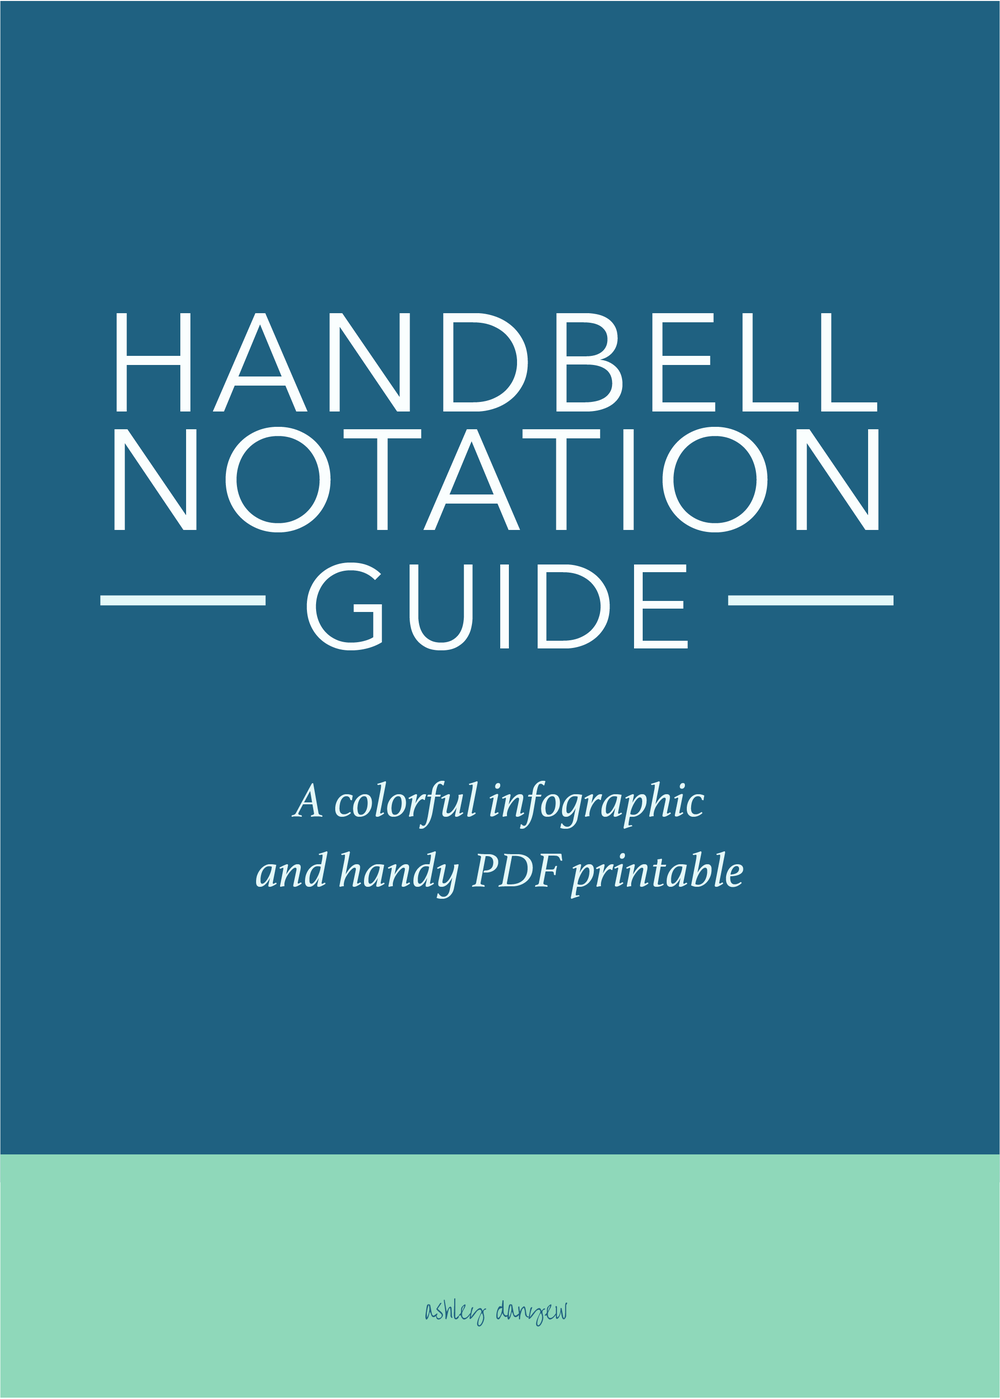 Handbell Notation Guide [Infographic] Ashley Danyew